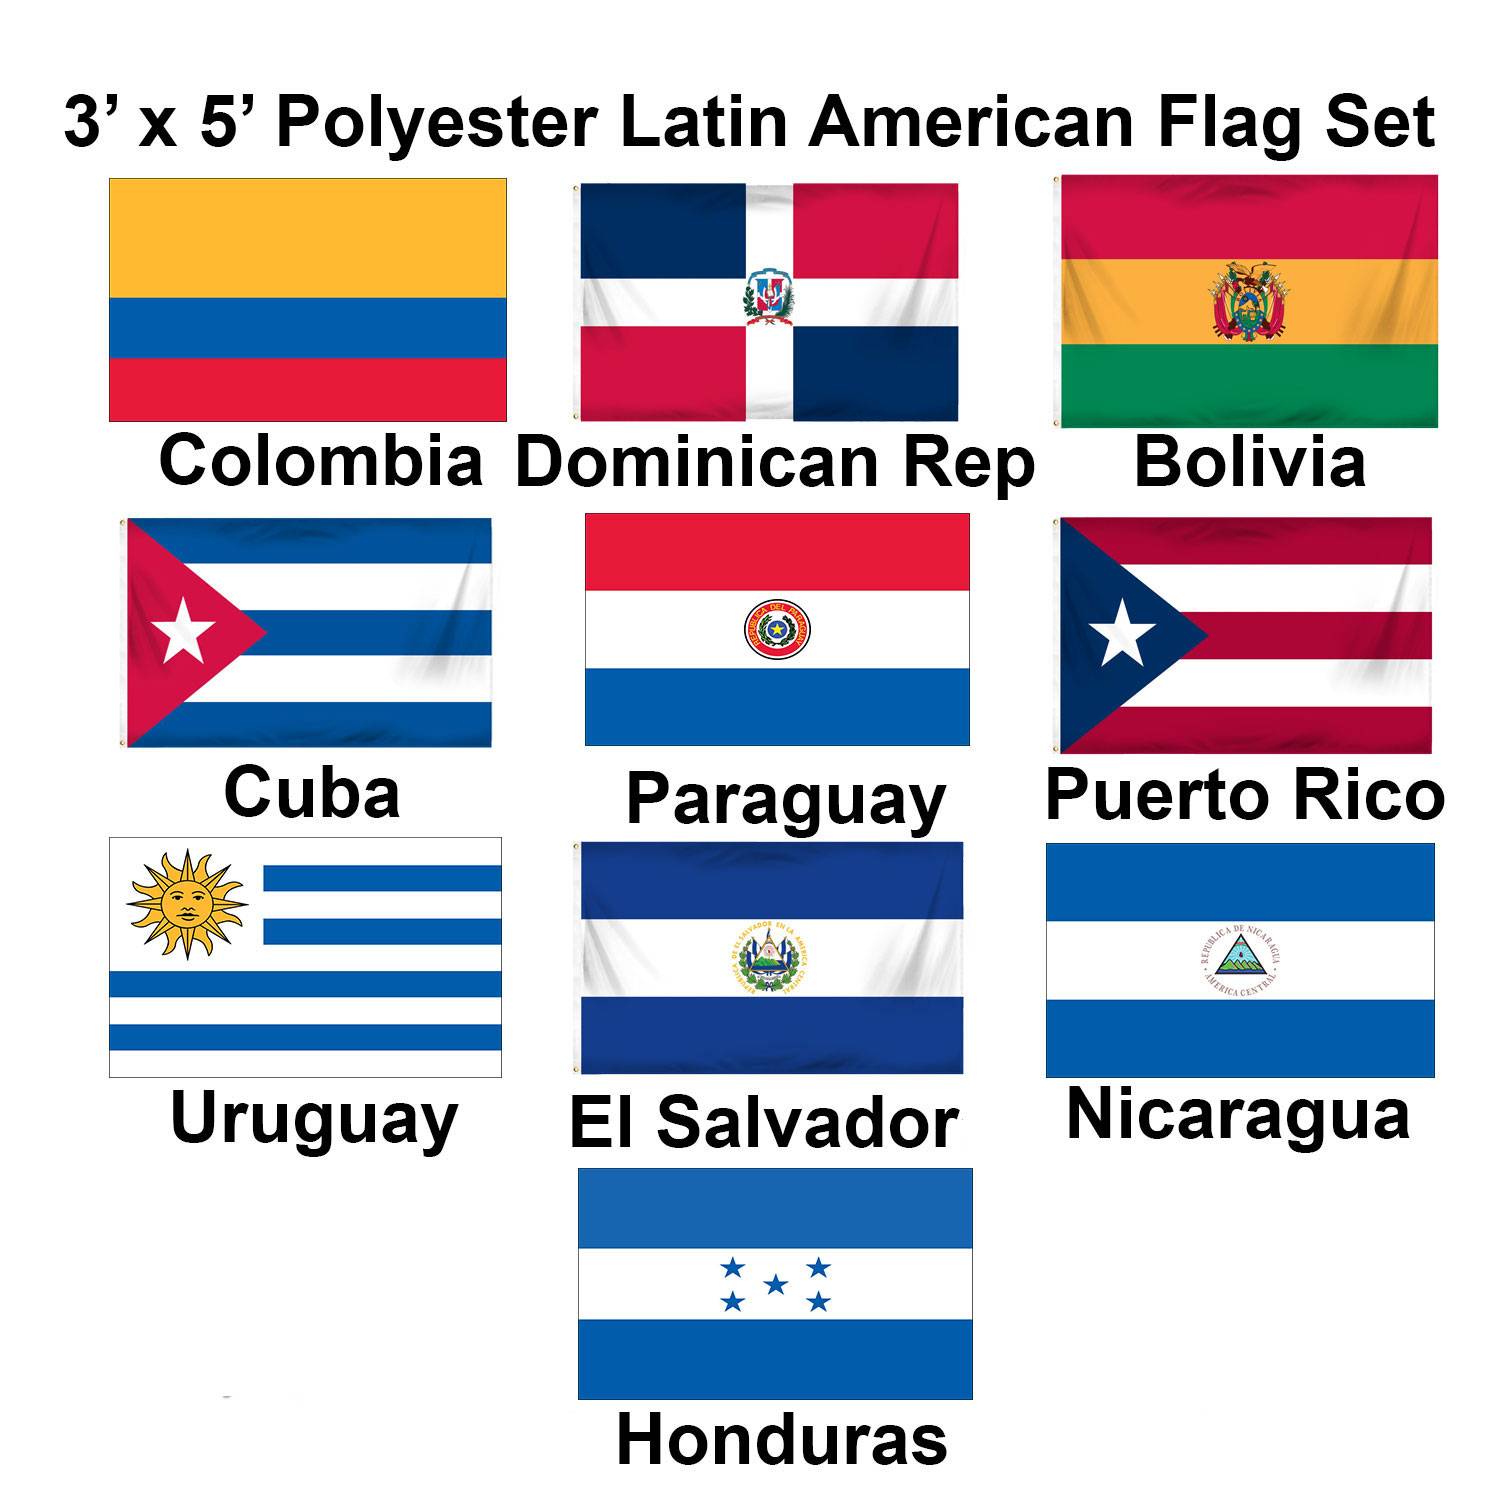 Latin American Polyester Flags For Sale with 1-800 Flags